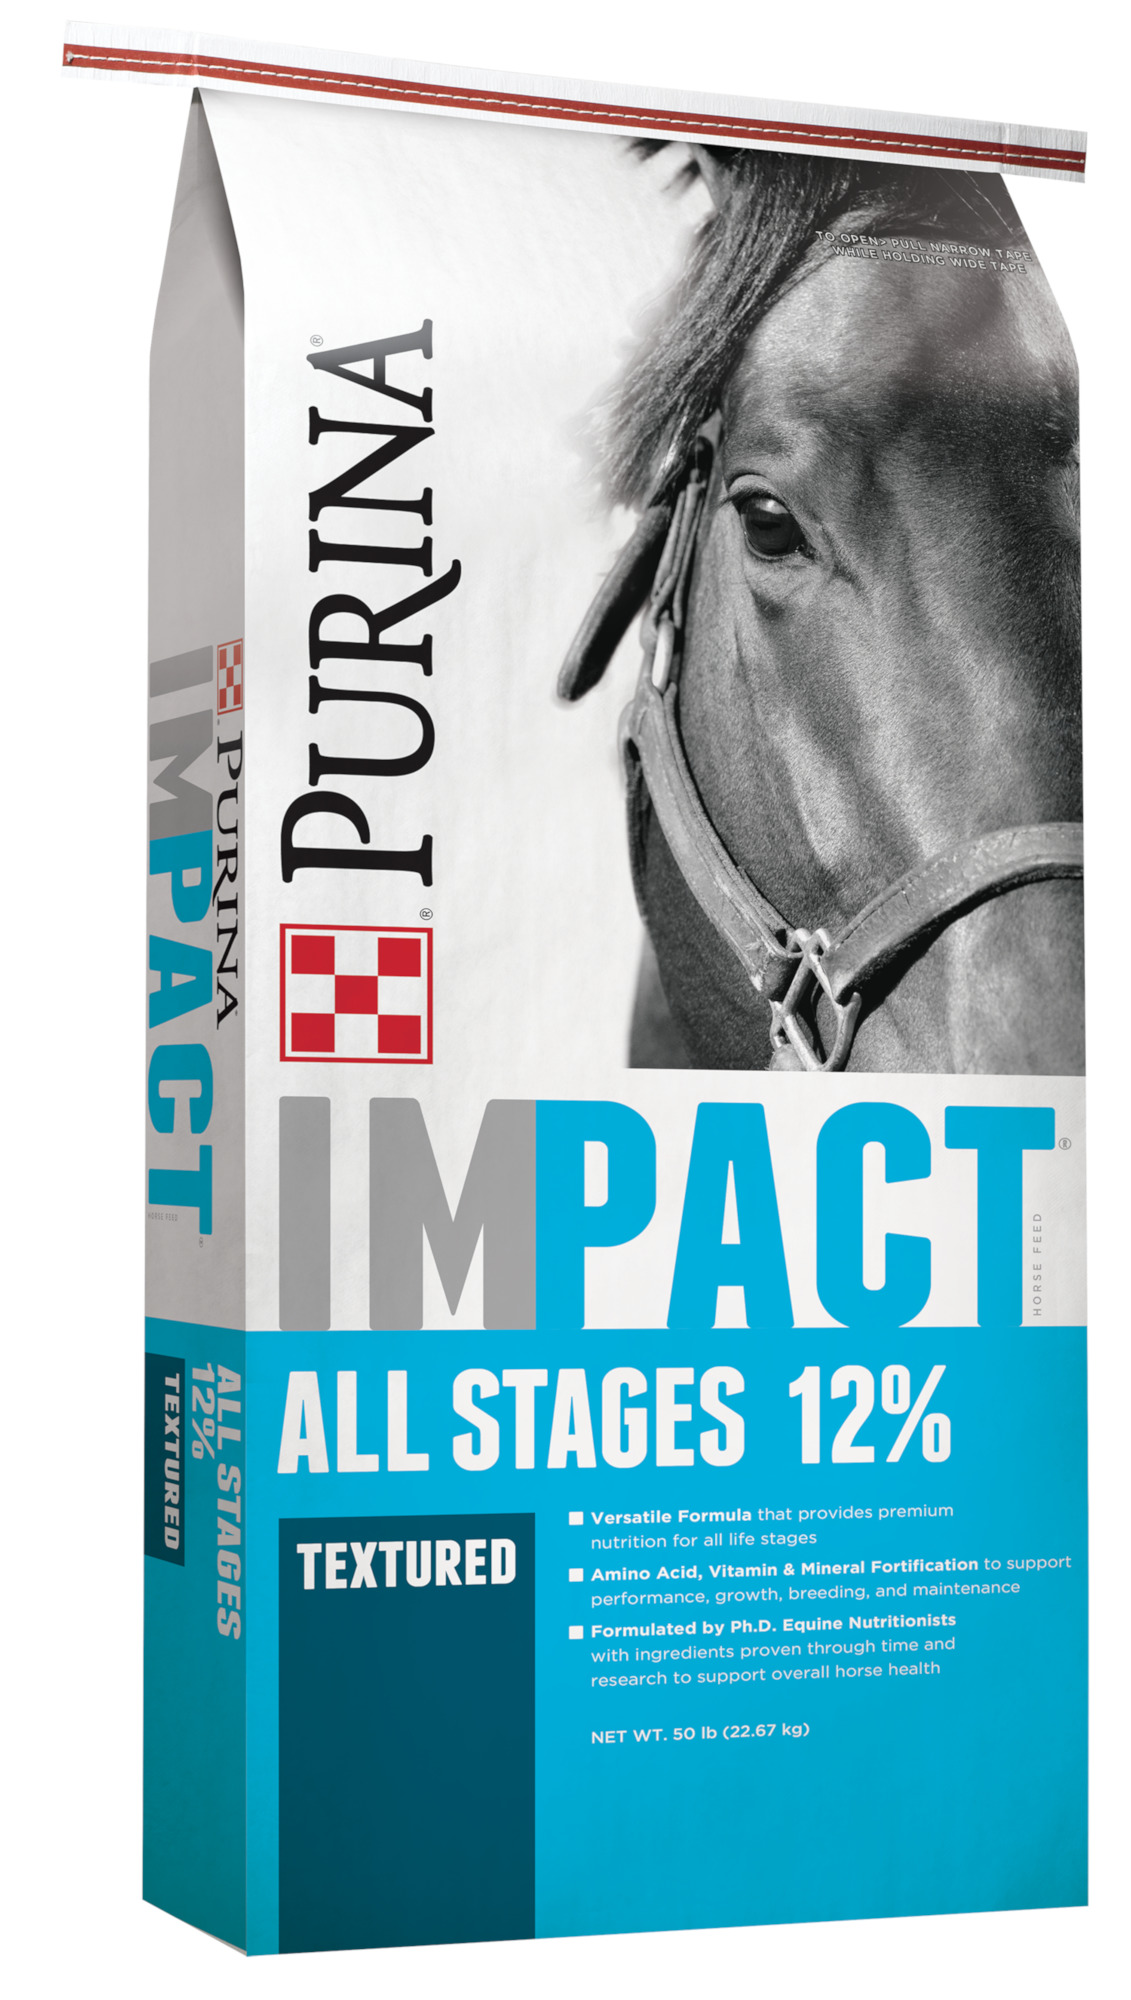 Purina&reg; Impact&reg; All Stages 12% Textured Horse Feed, 50 lbs